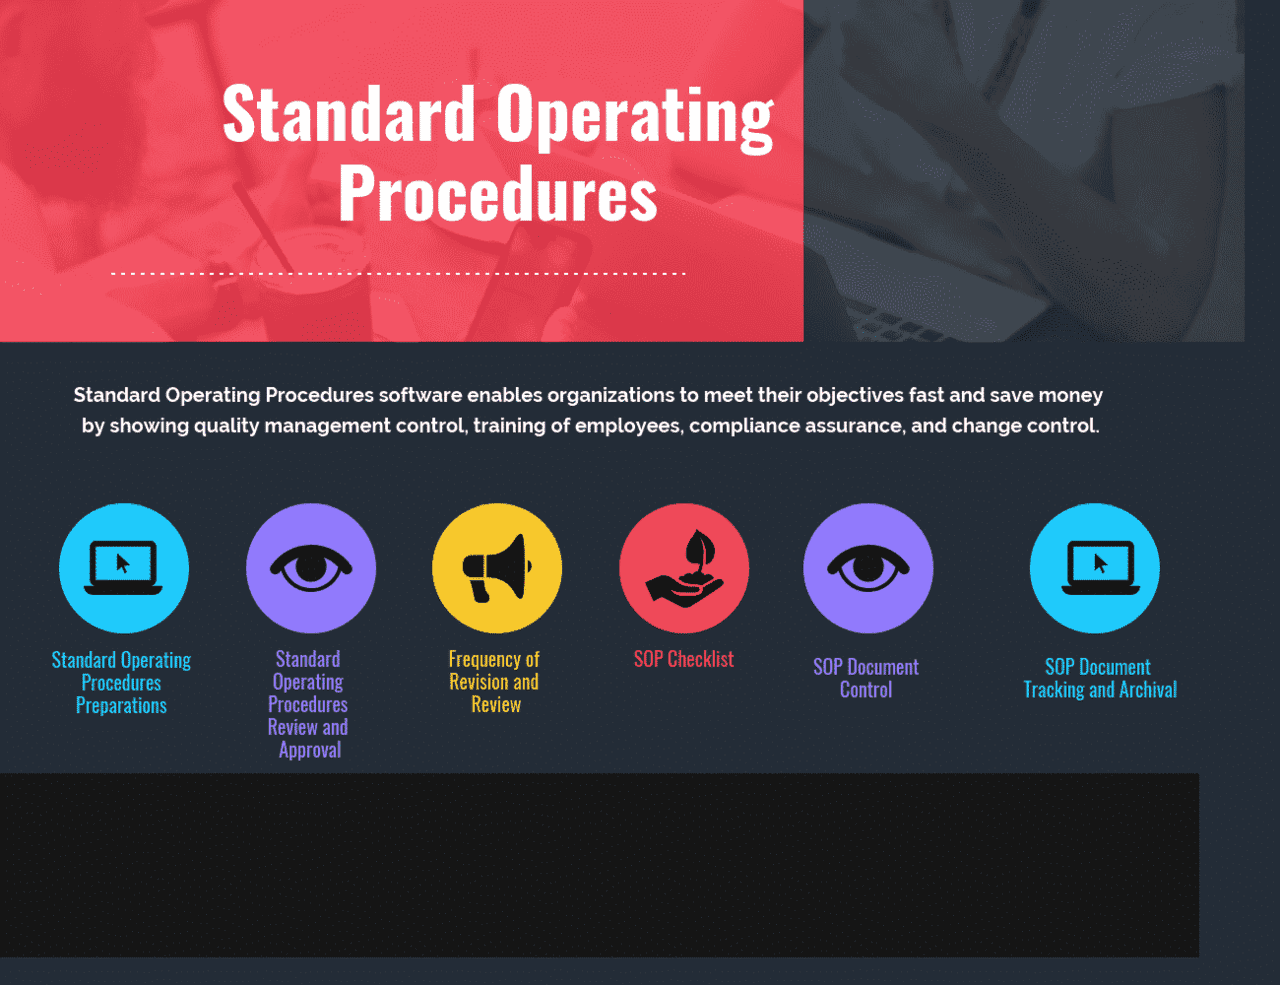 Guidelines for Preparing Standard Operating Procedures in 2021 - Reviews,  Features, Pricing, Comparison - PAT RESEARCH: B2B Reviews, Buying Guides &  Best Practices